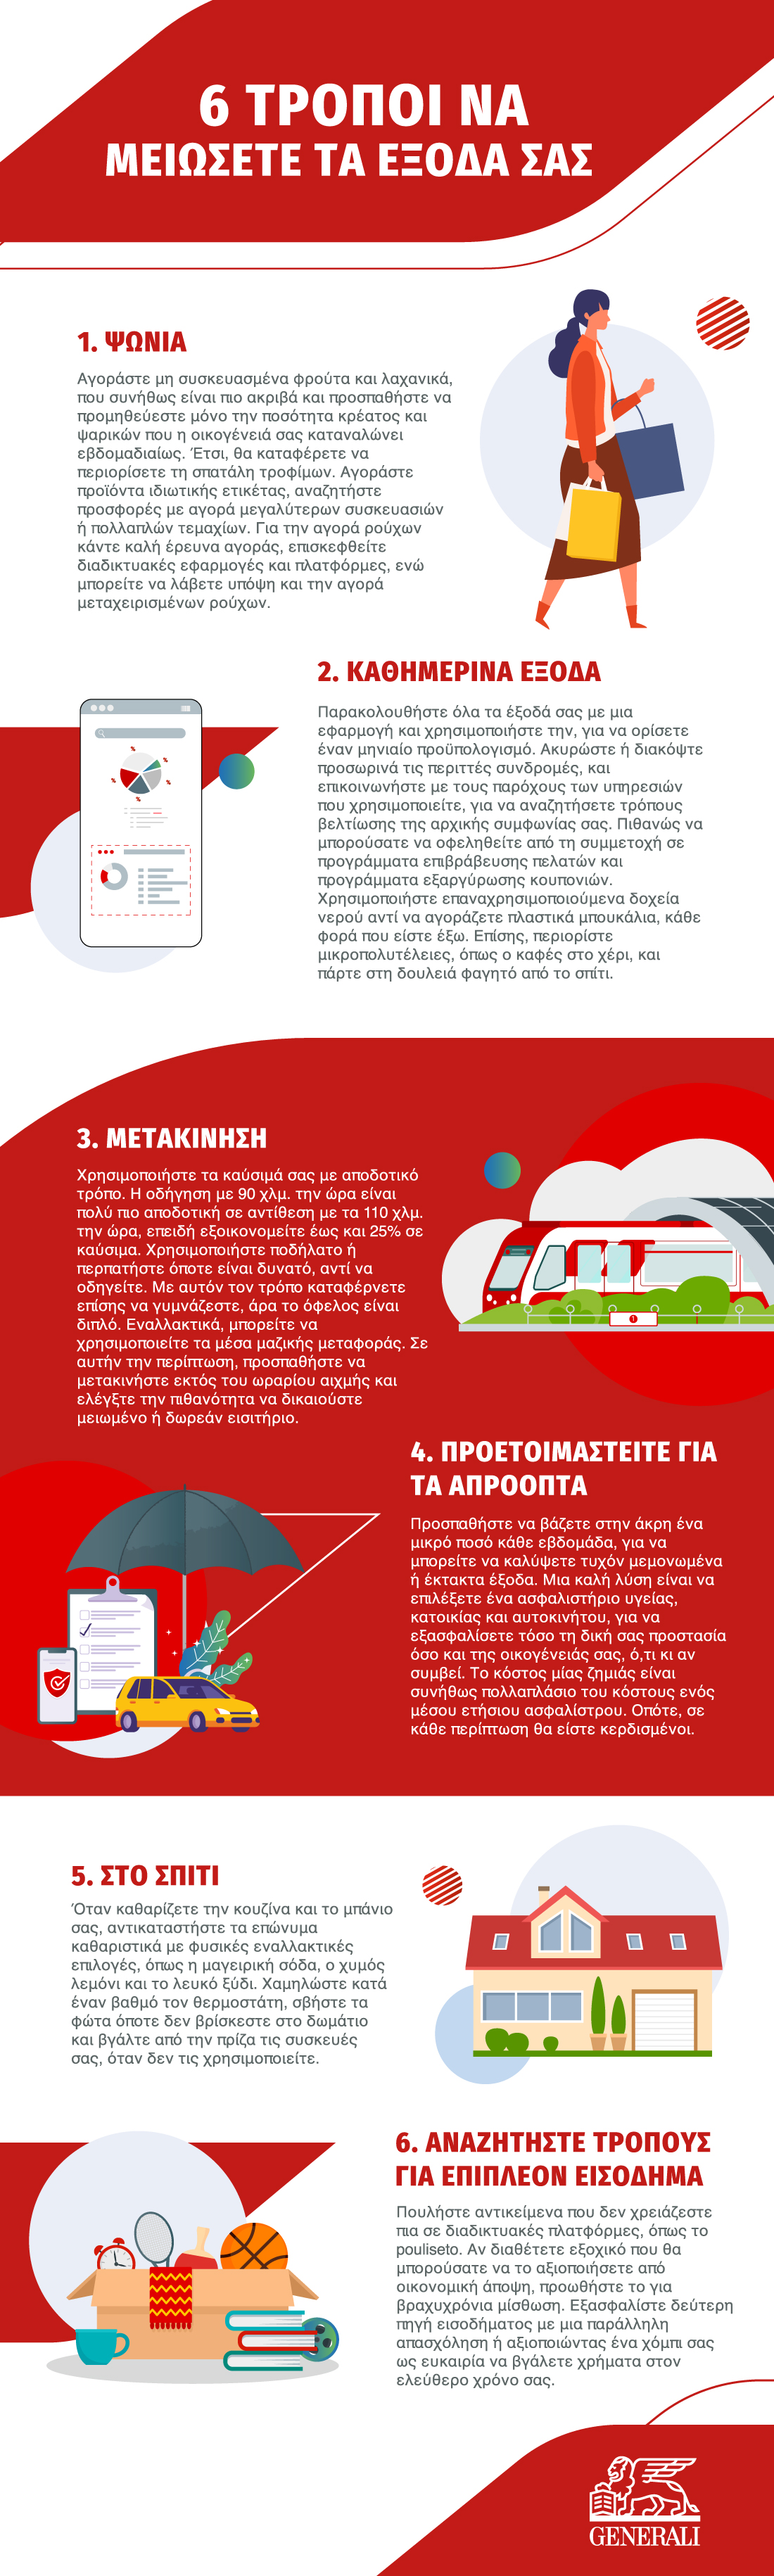 Generali_Cybersecurity_Infographic_v4.png